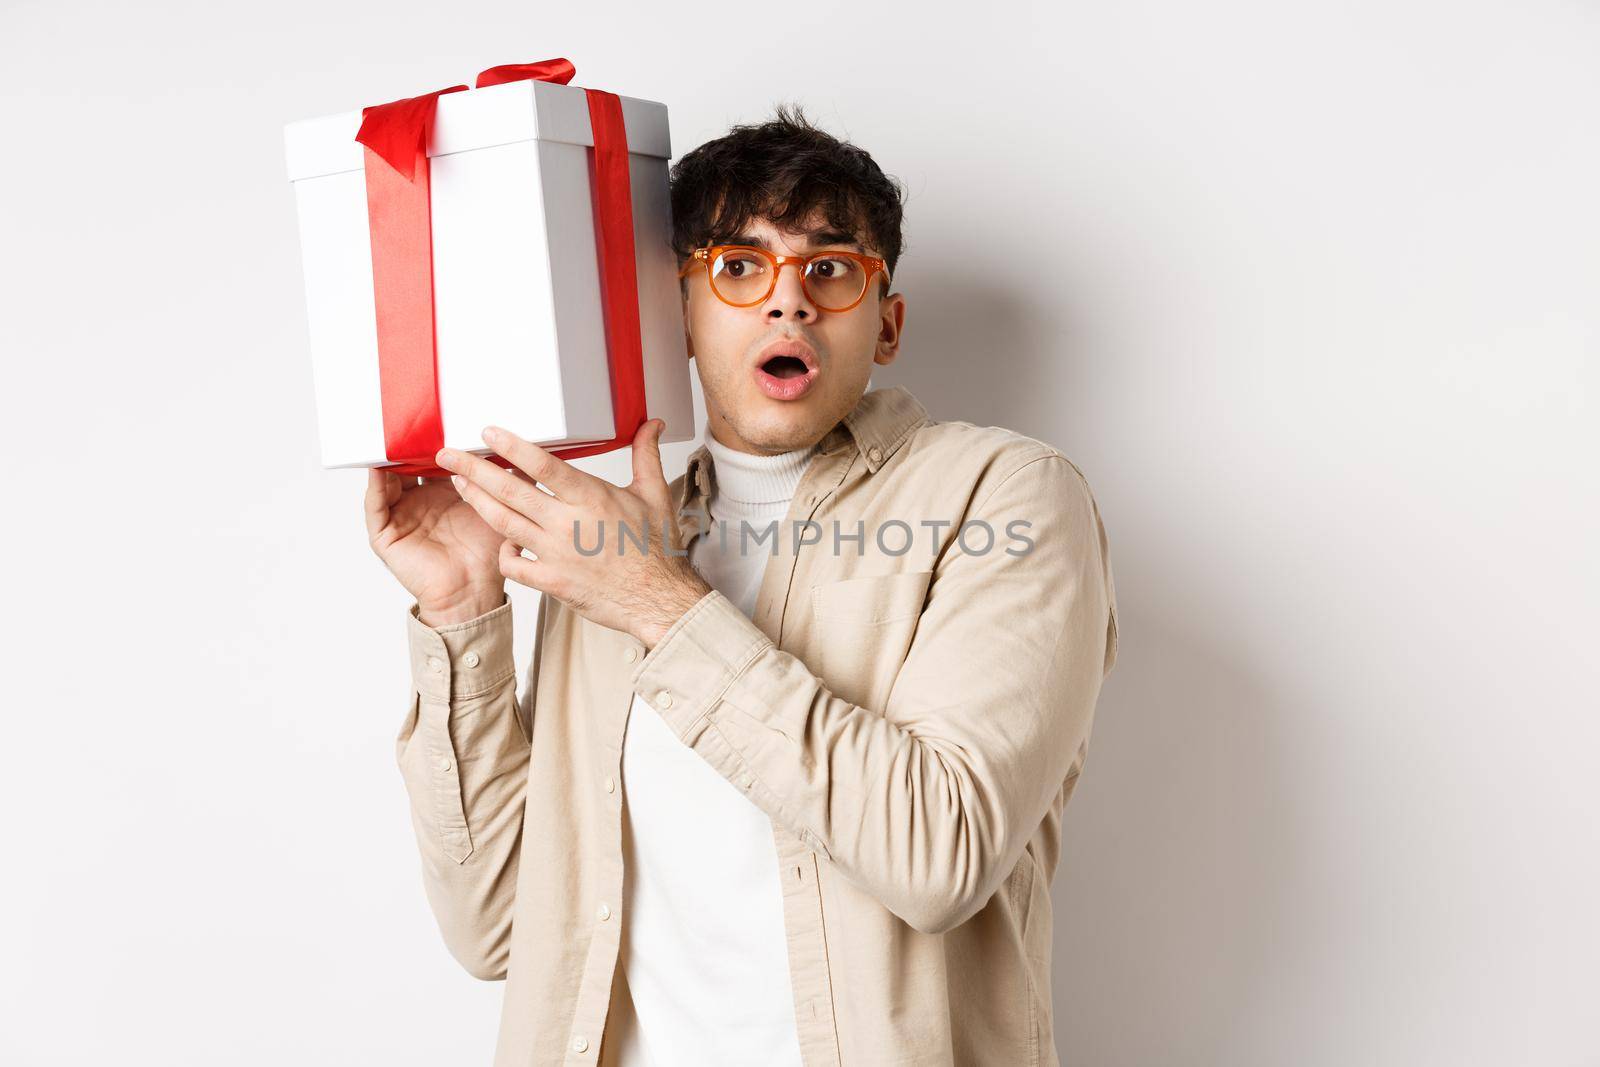 Holidays concept. Funny young man in glasses shaking gift box, listening what inside present and gasping amazed, standing on white background.